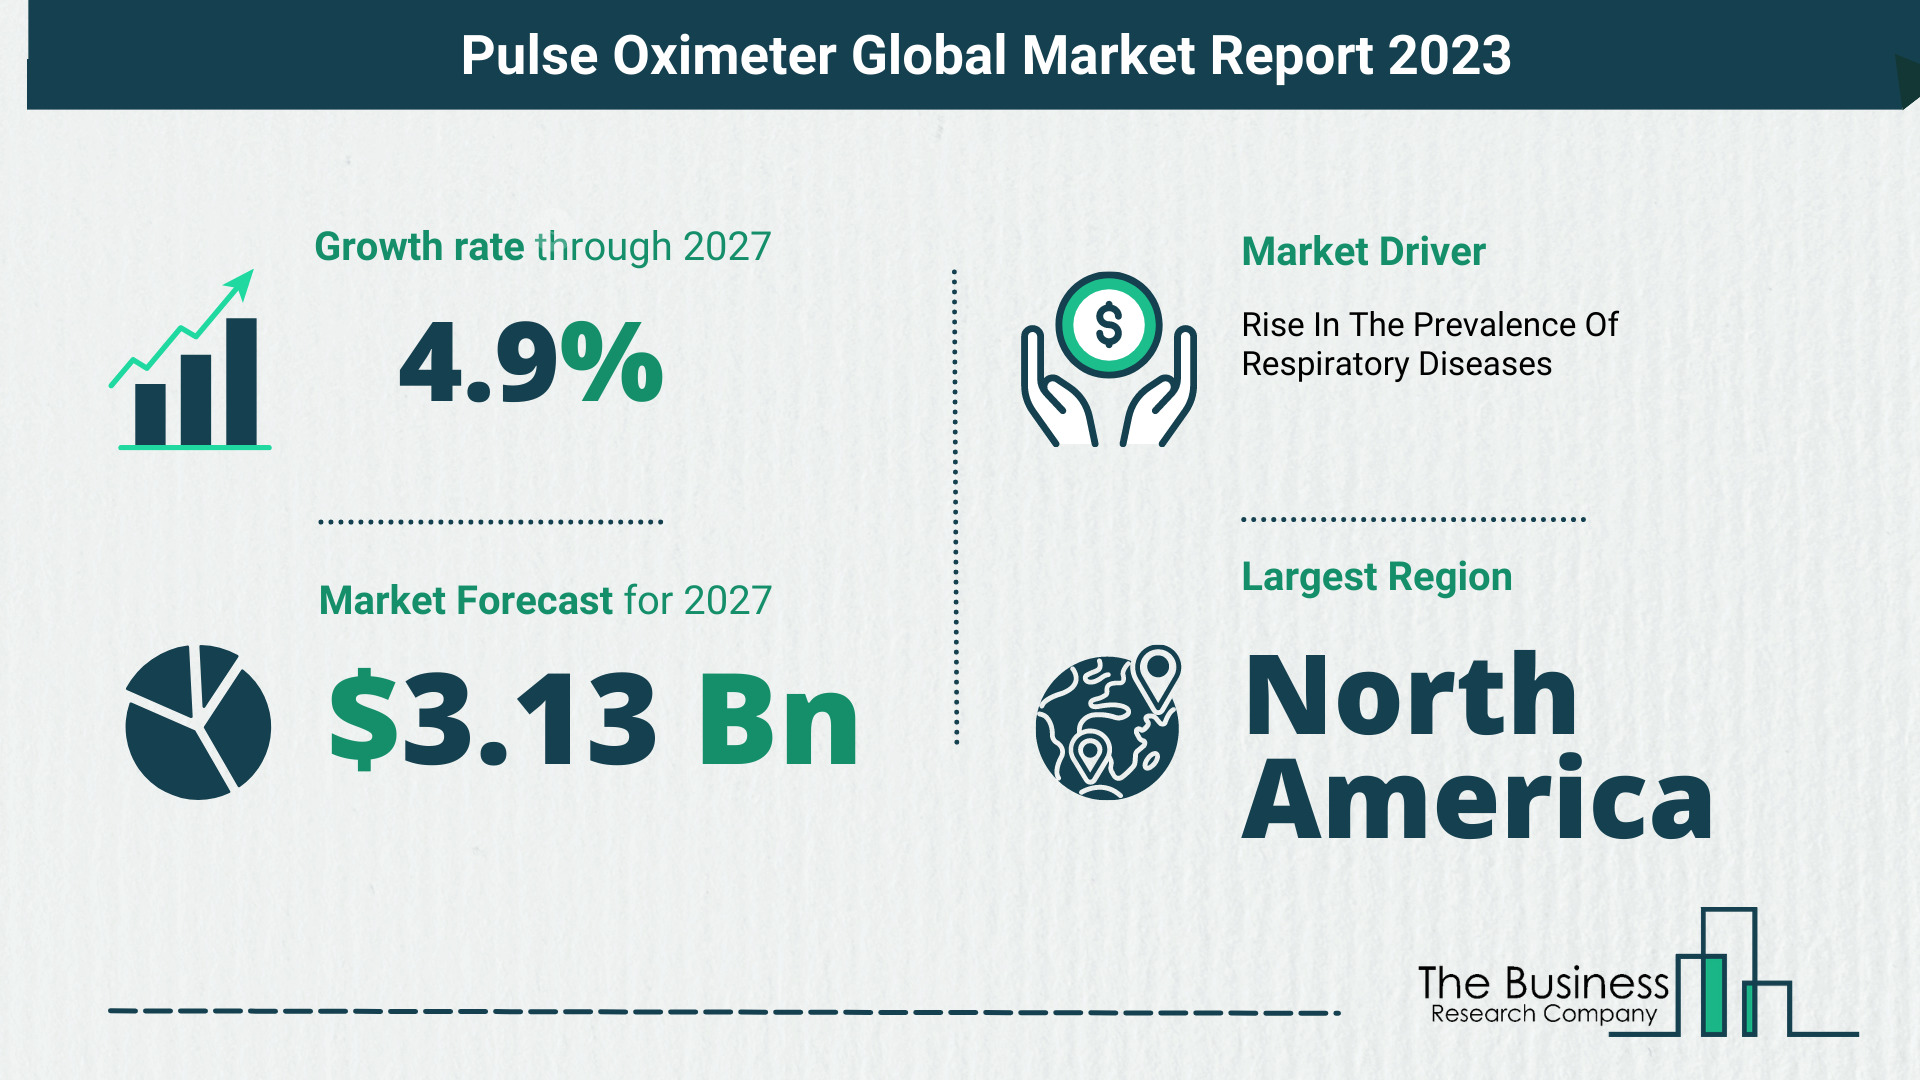 Global Pulse Oximeter Market Opportunities And Strategies 2023